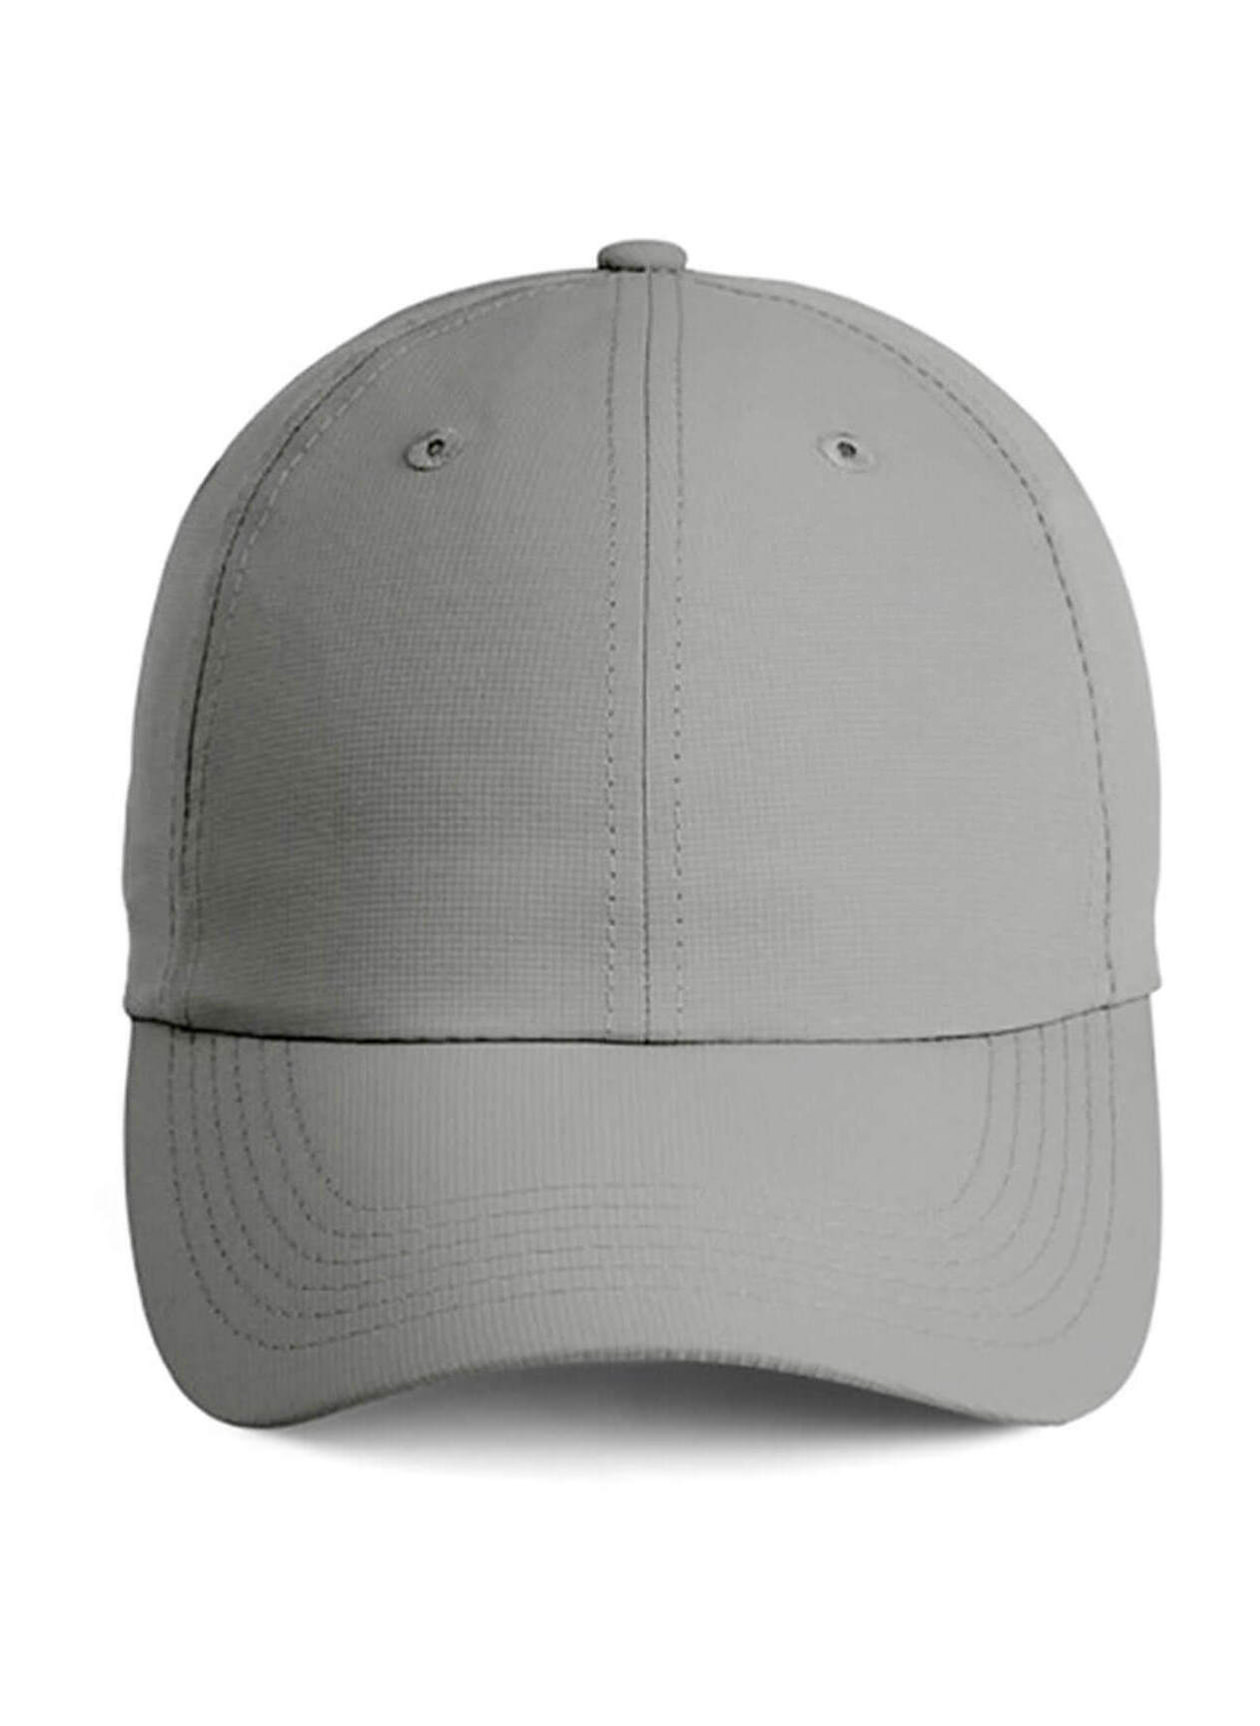 Imperial Frost Grey Original Performance Hat